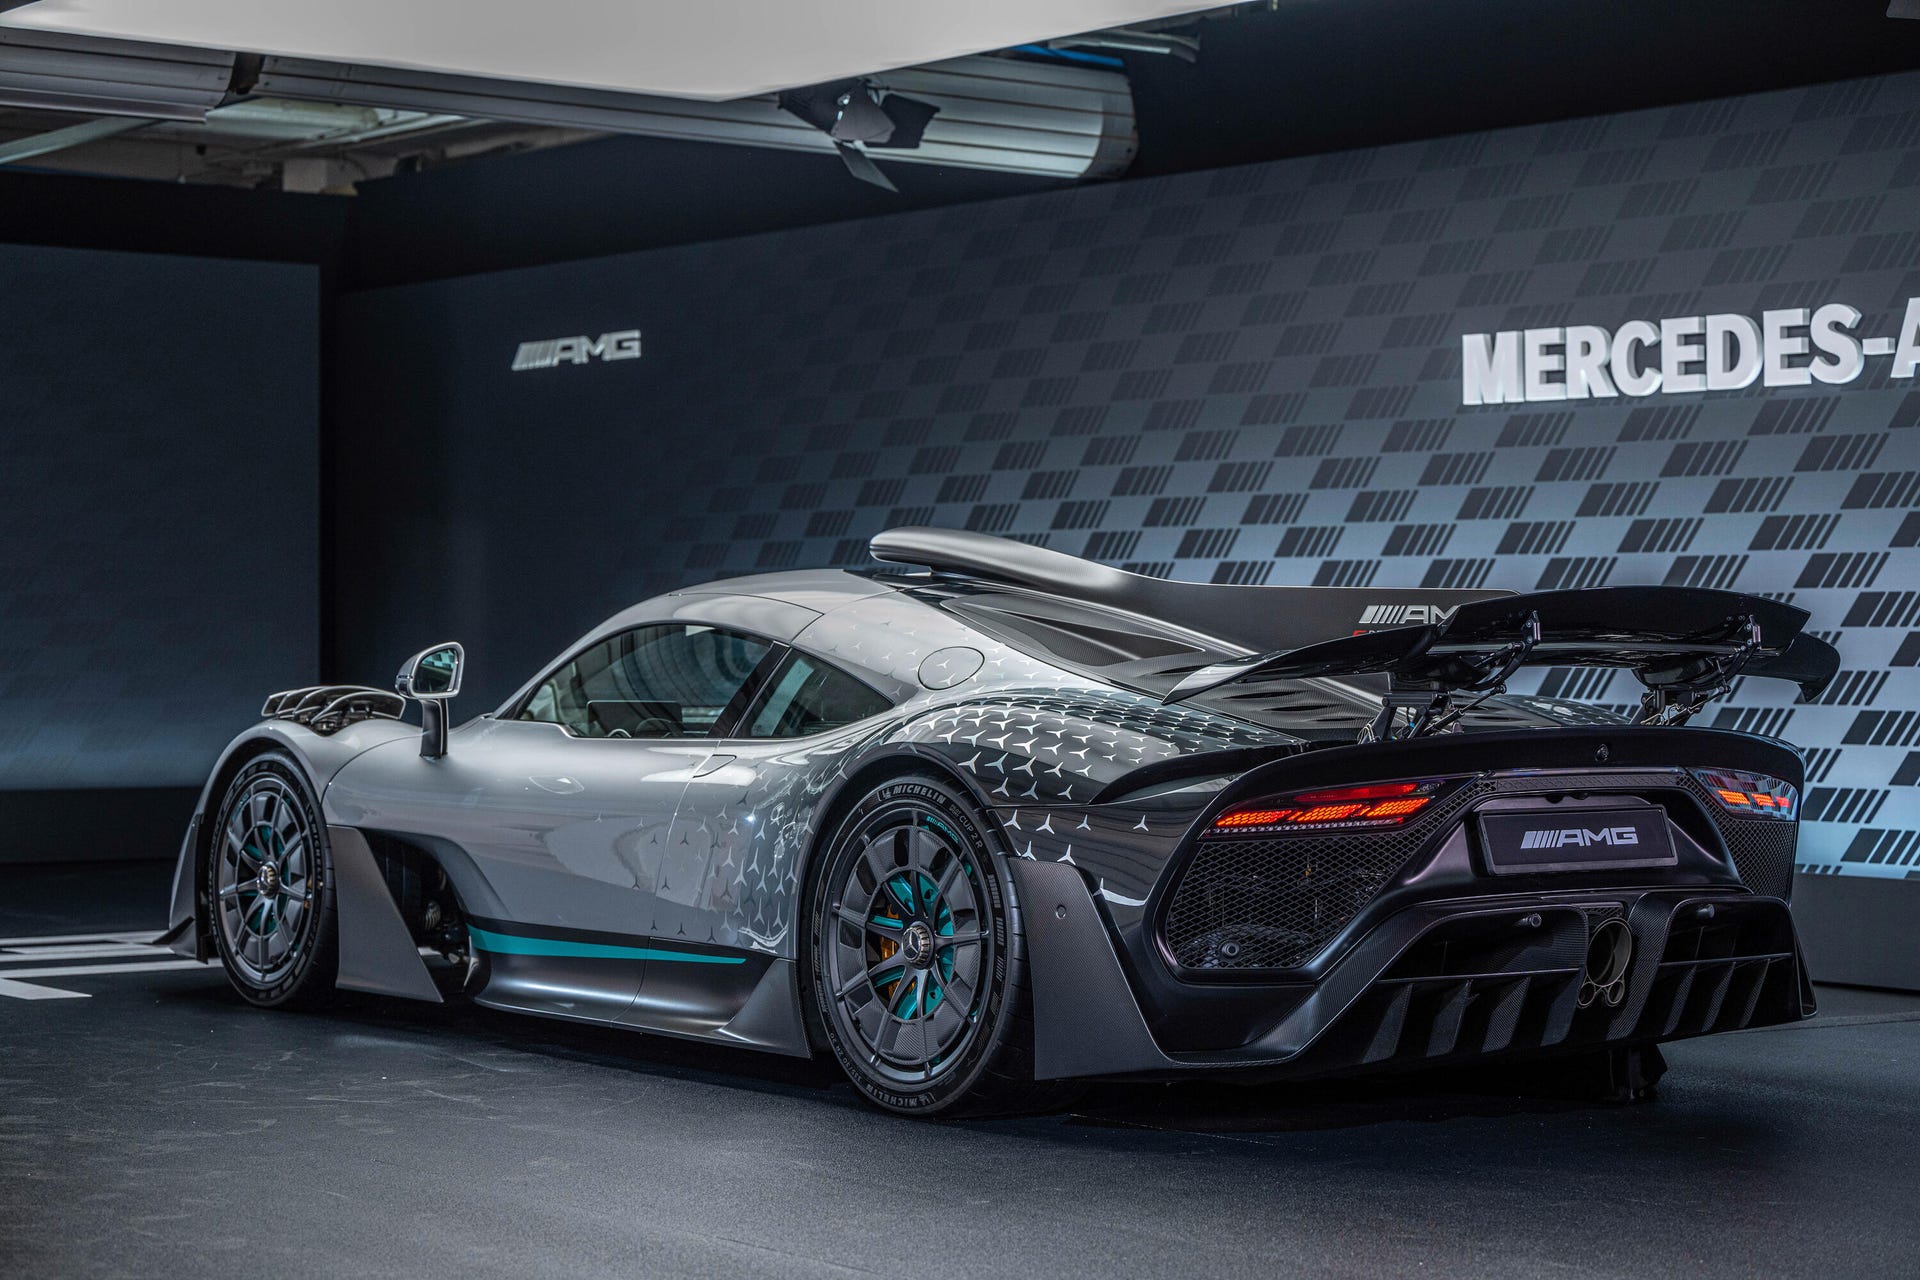 Mercedes-AMG One Hypercar from a rear angle